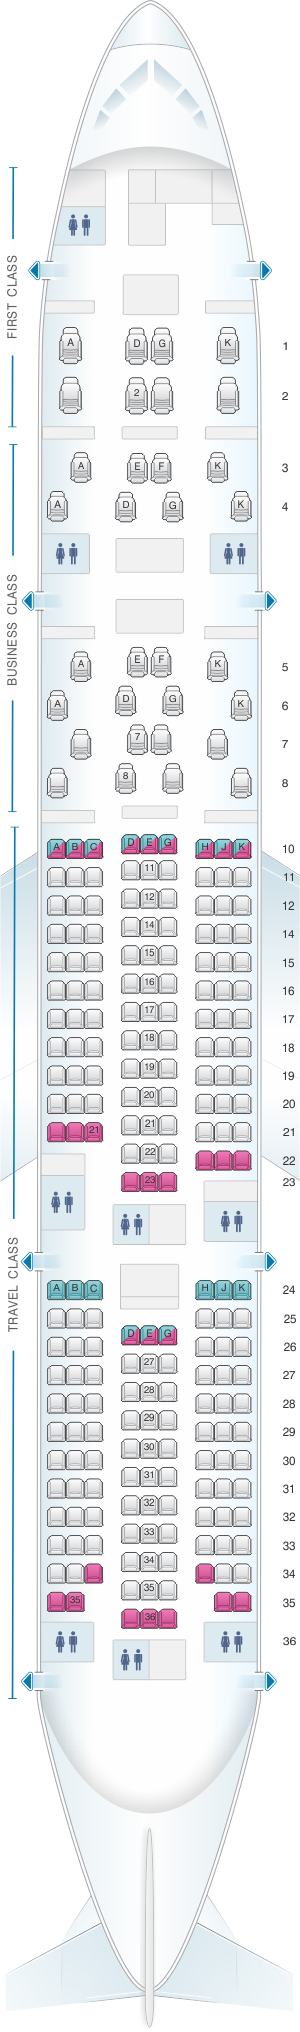 Seat map for Asiana Airlines Boeing B777 200ER 246PAX